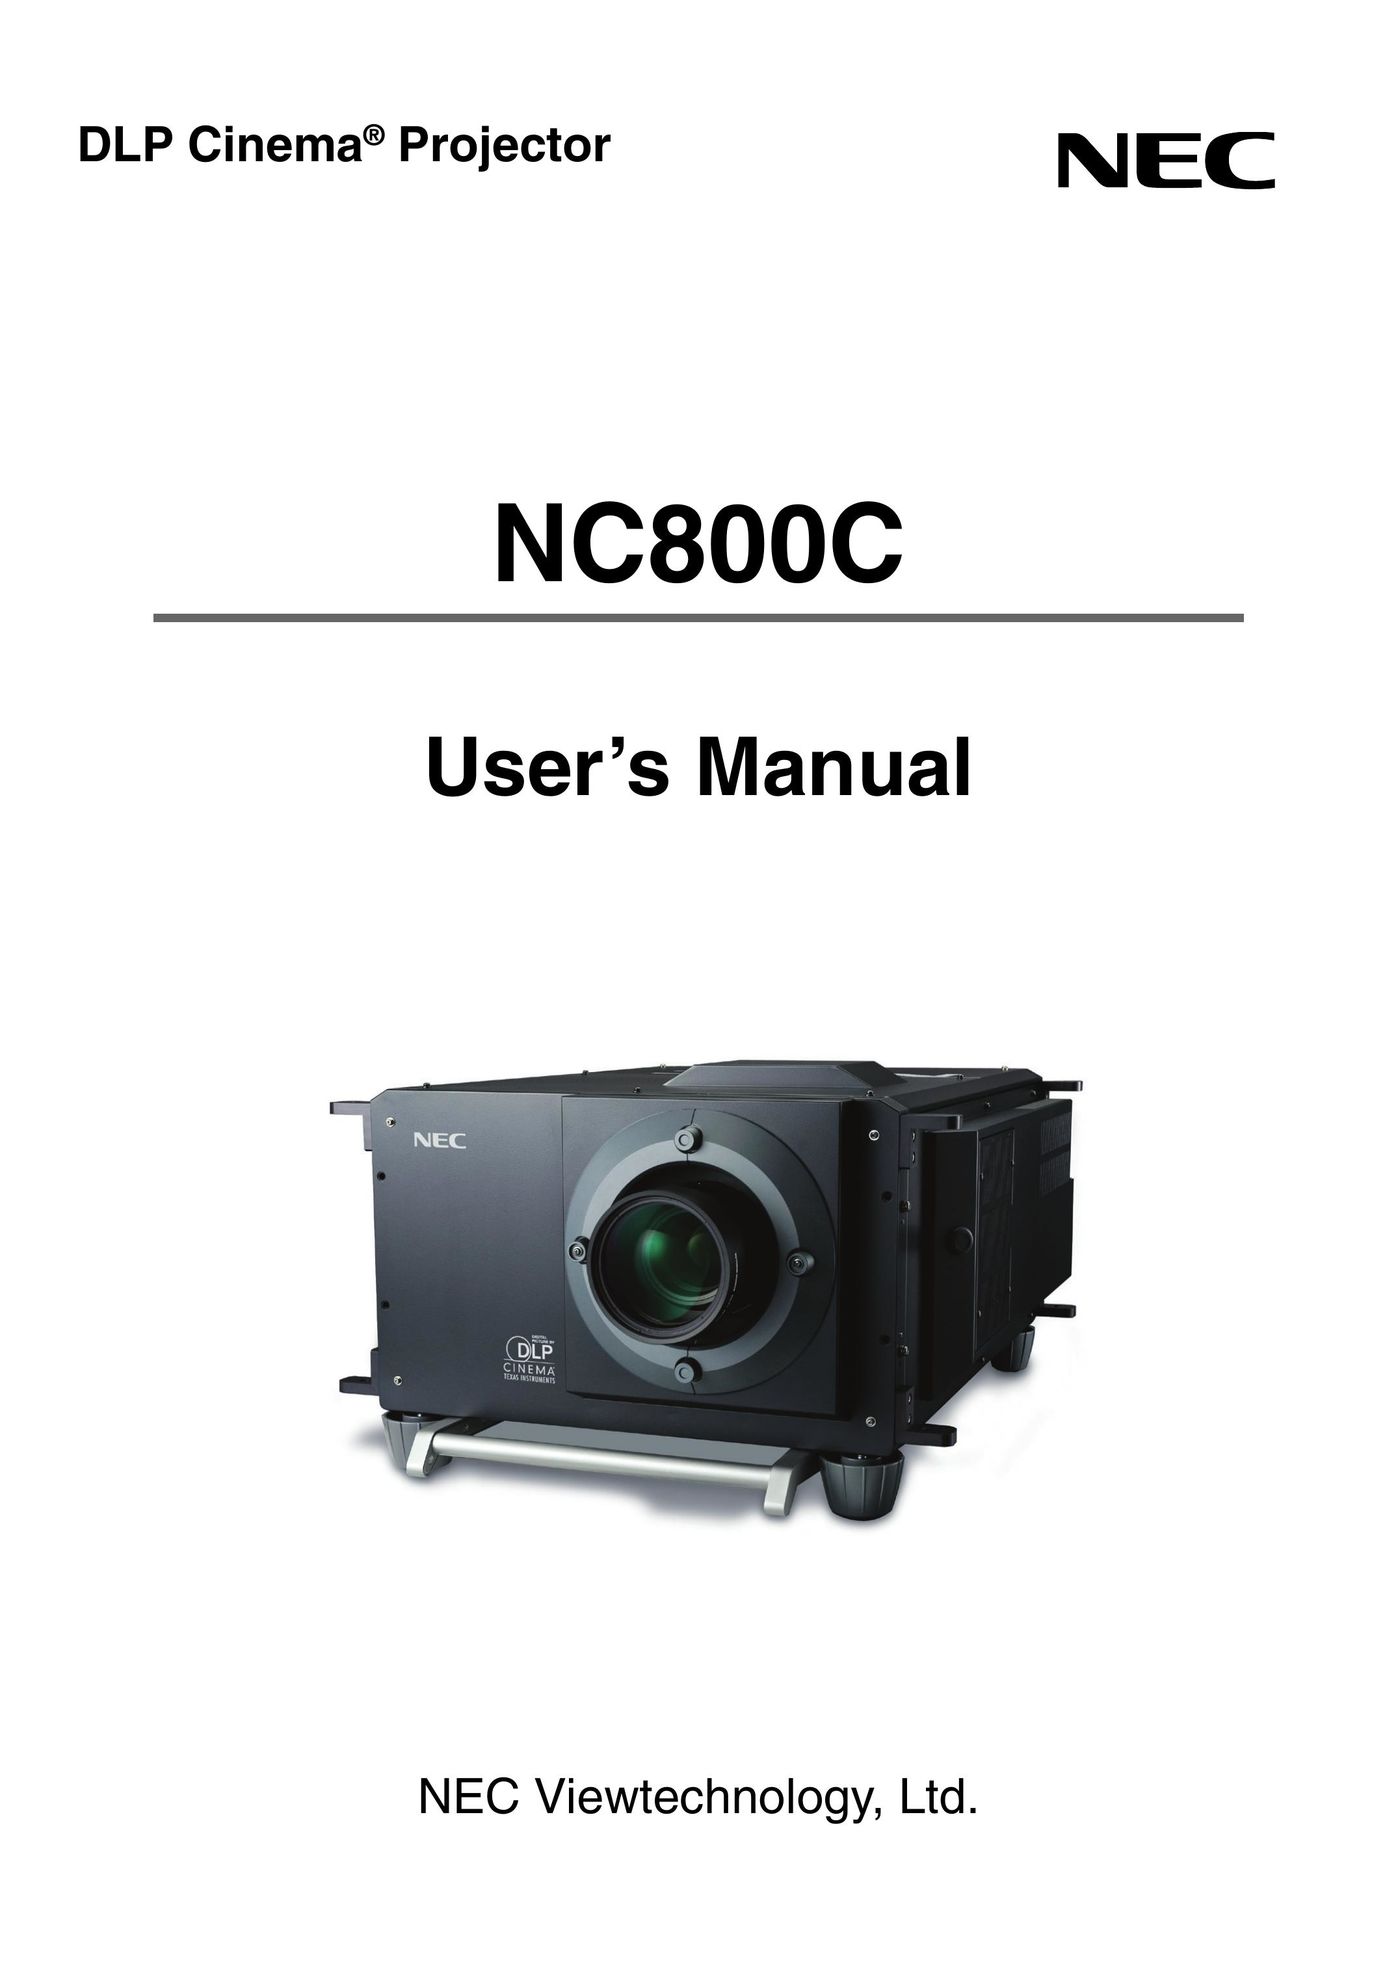 NEC NC800C Projection Television User Manual